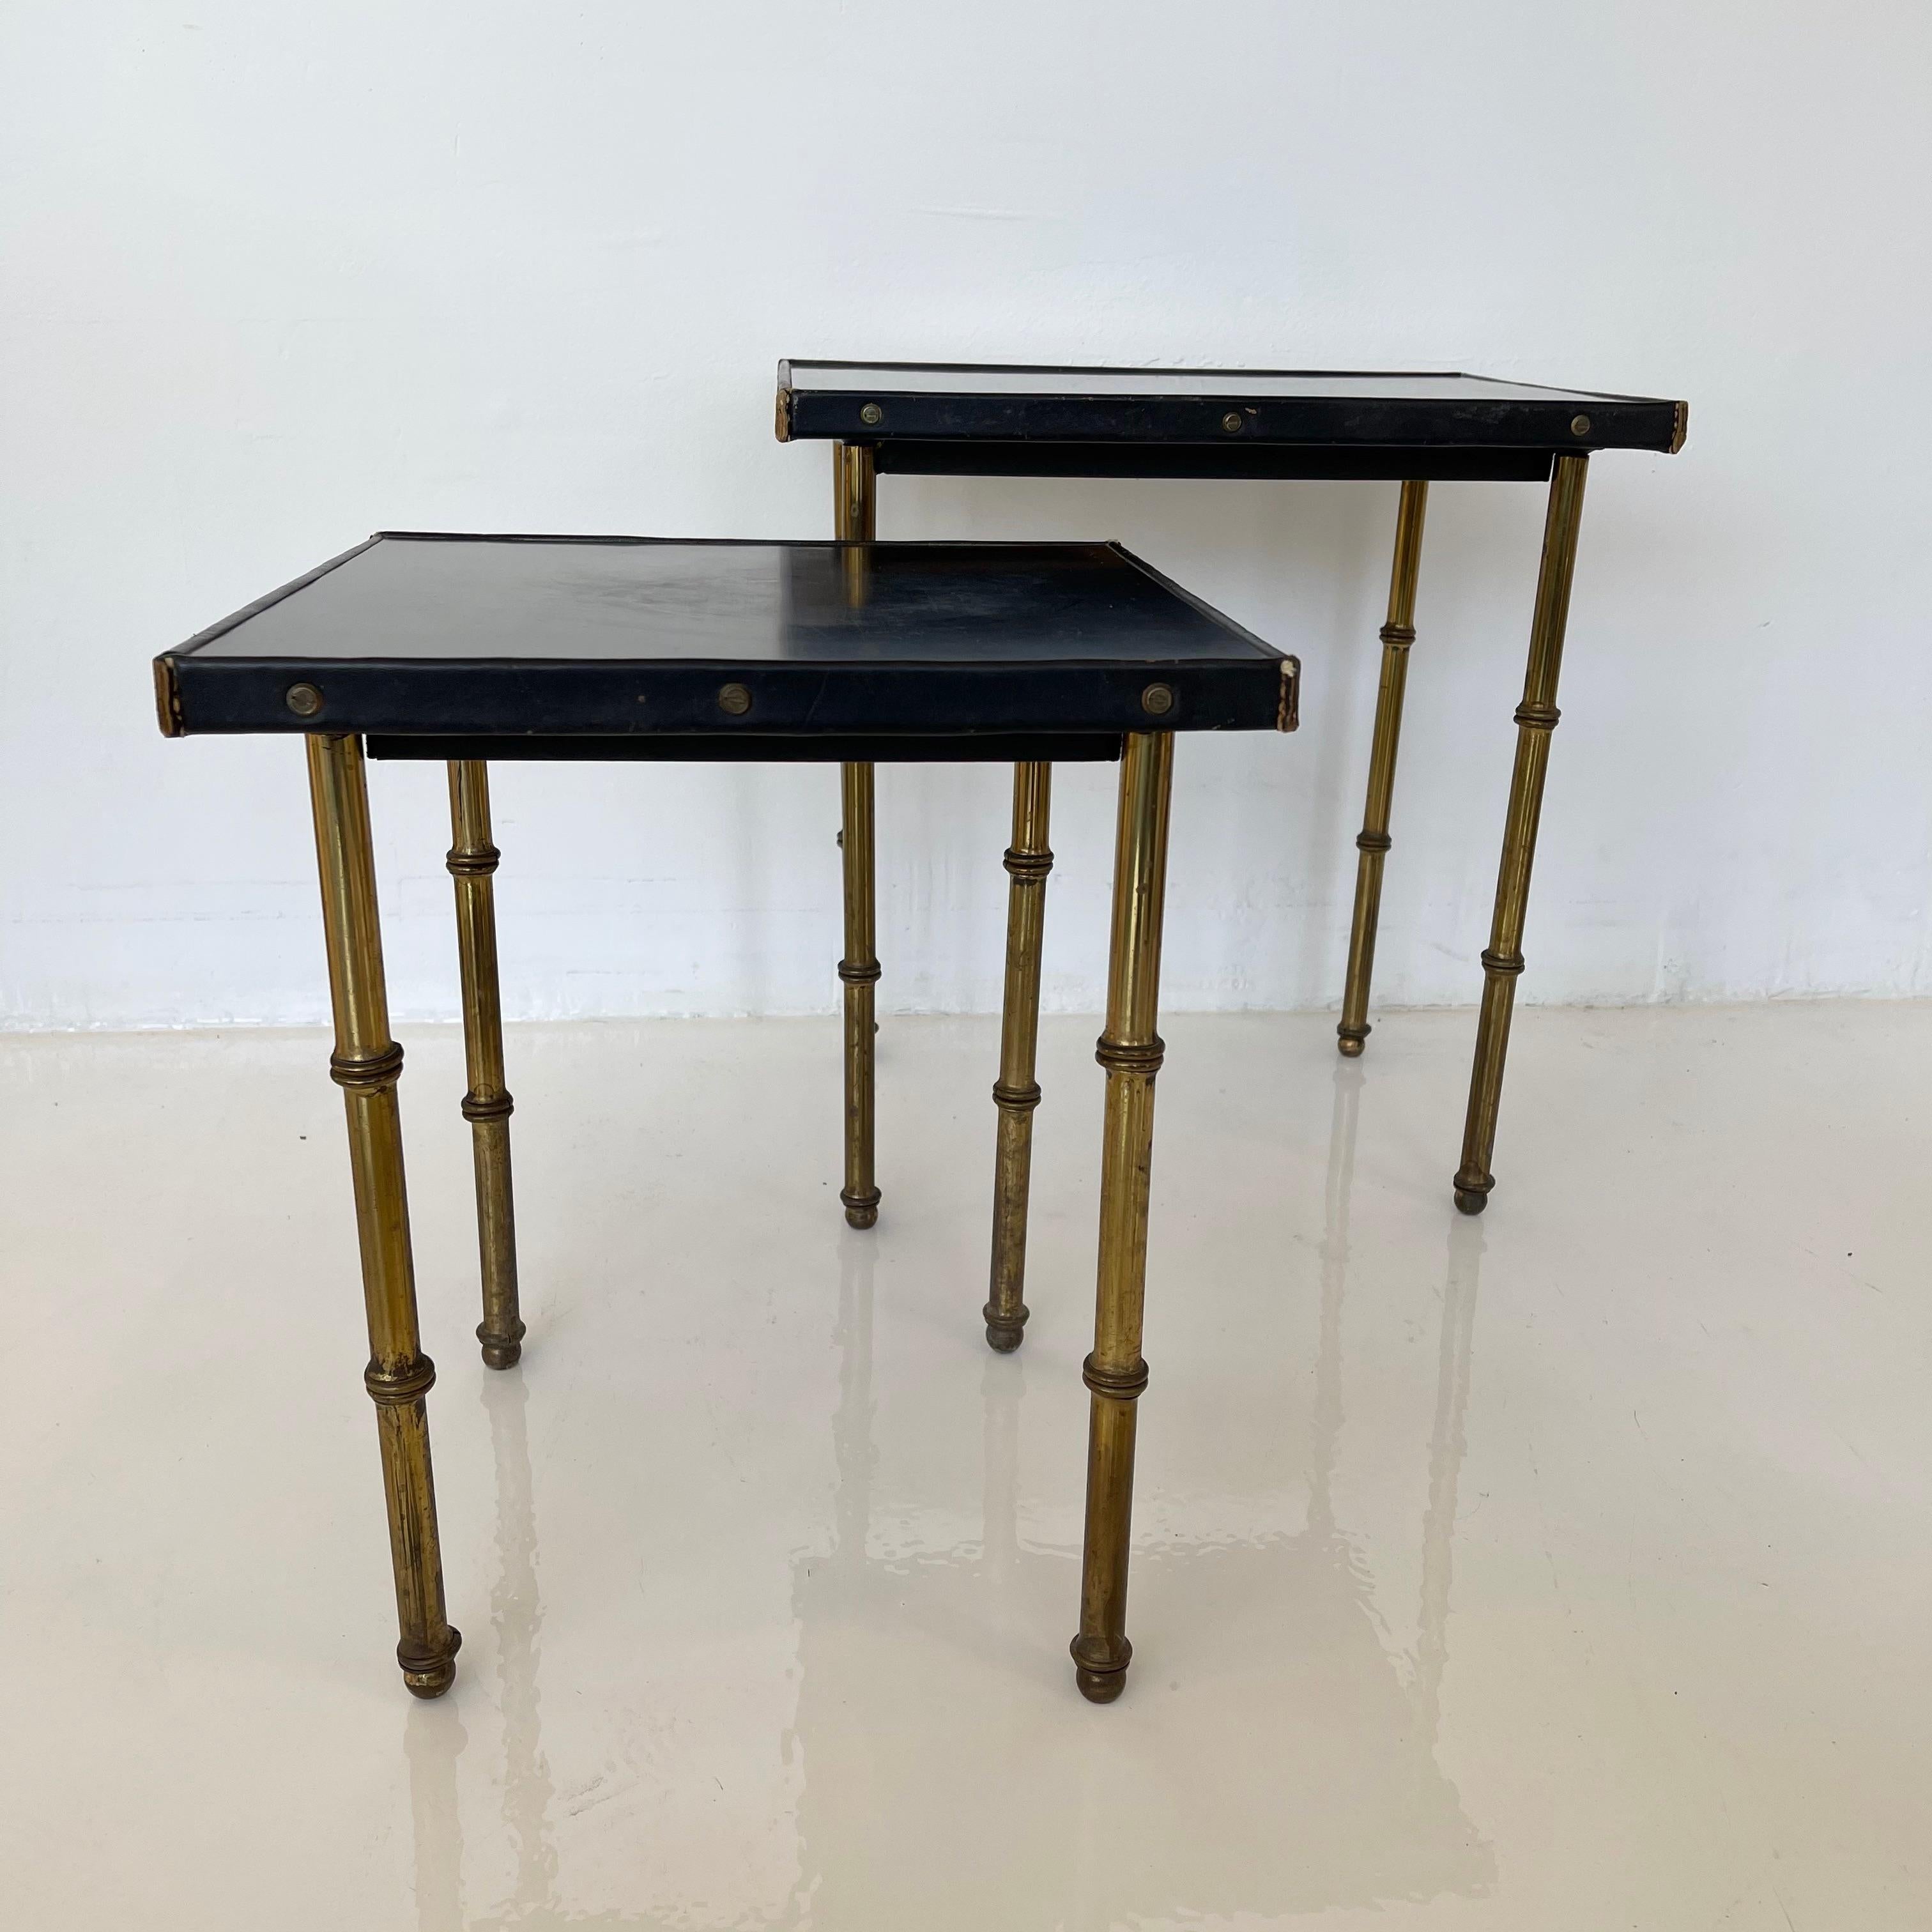 Handsome pair of side tables by Jacques Adnet. Brass bamboo legs, black Masonite top with leather trip and brass hardware. Iron frame. Very good vintage condition. Smaller table can nest perfectly underneath the larger table. Rare set of collectible